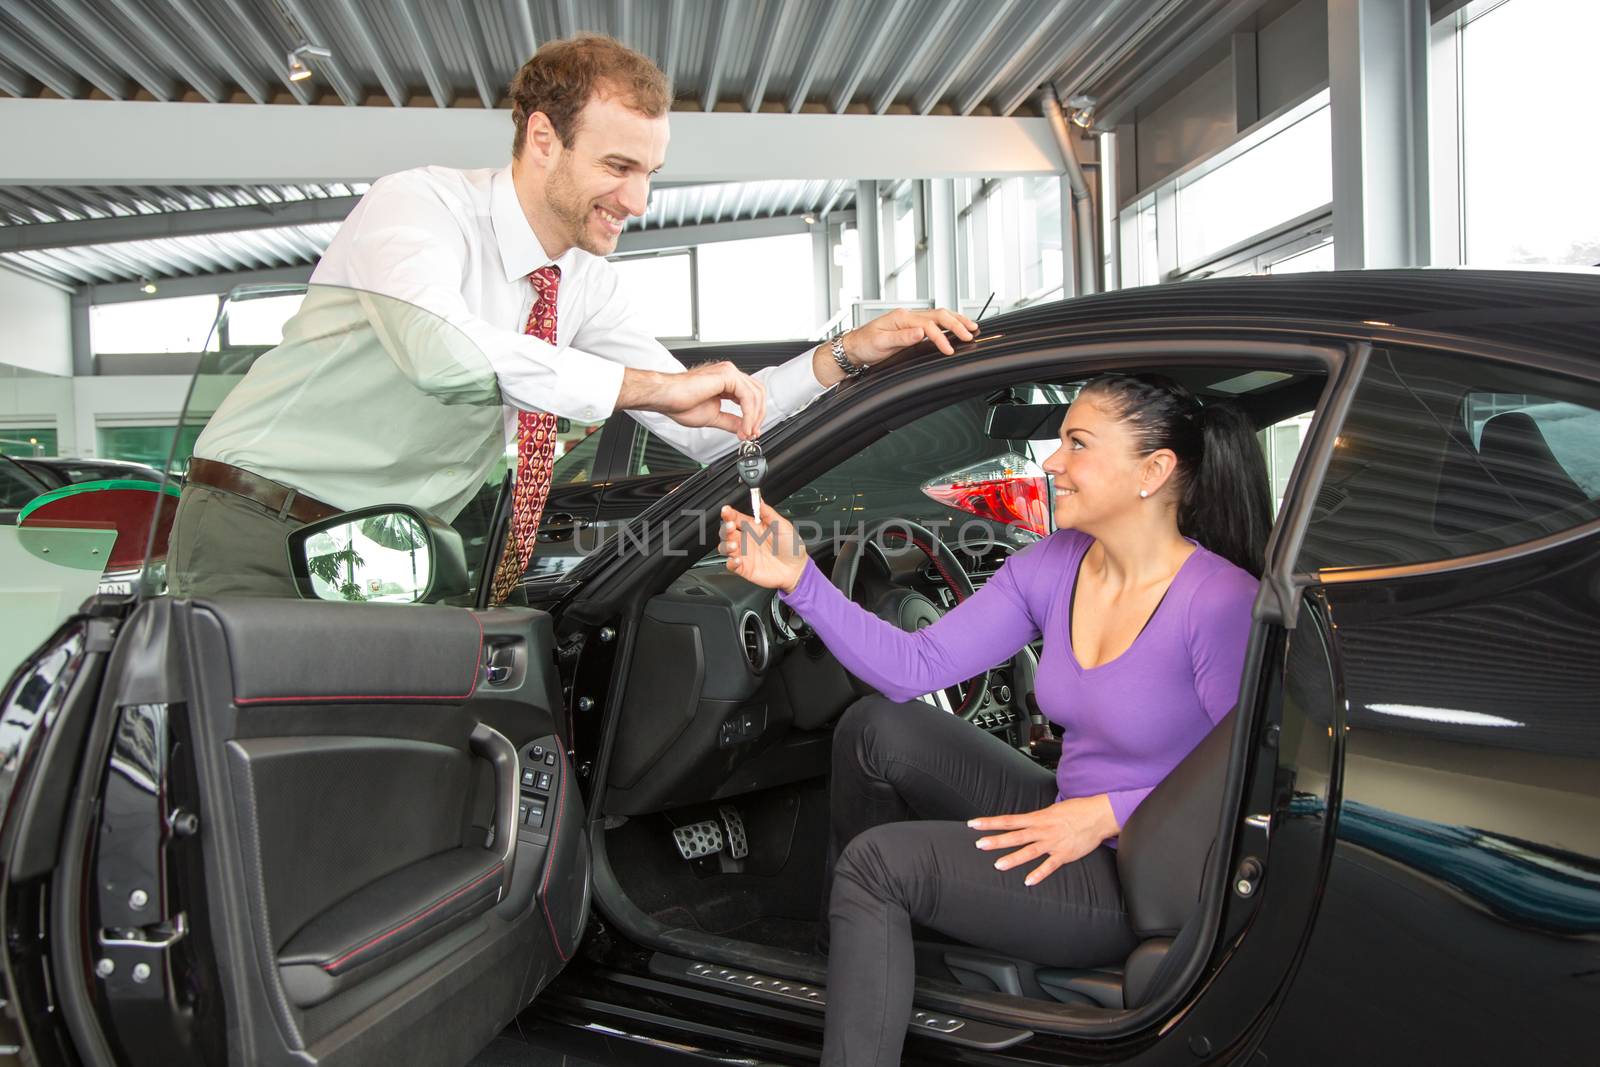 Car salesman sells a car to happy customer in car dealership and hands over the keys.